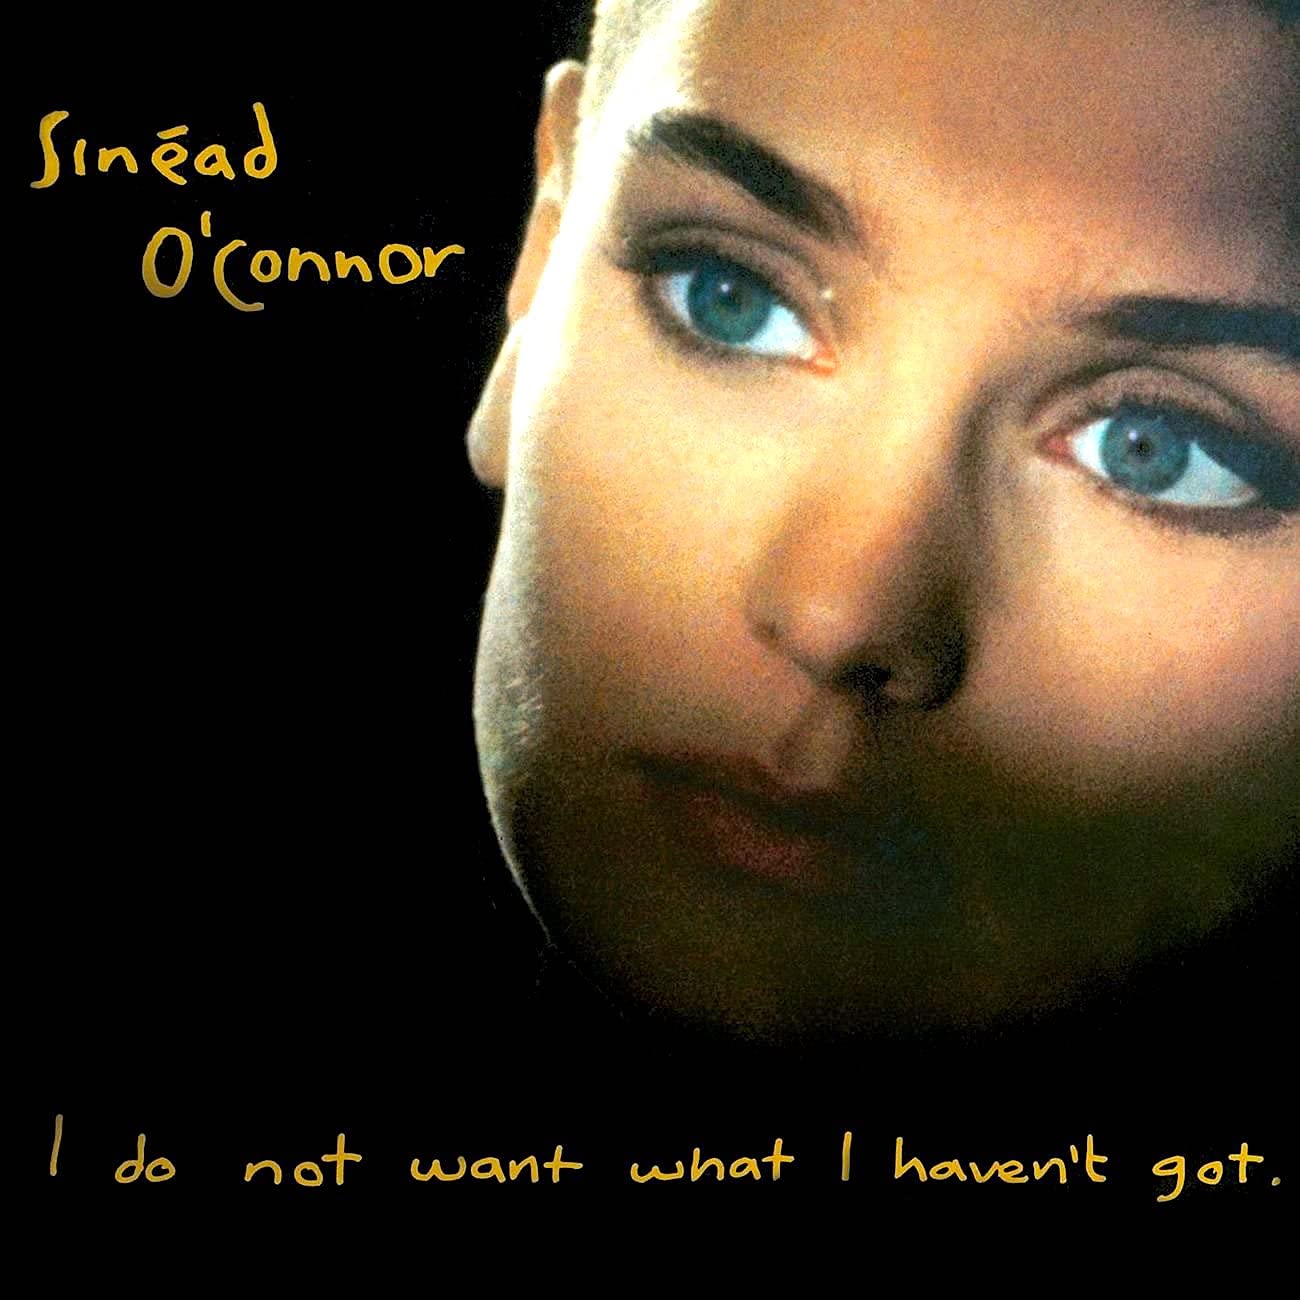 I Do Not Want What I Haven't Got, Sinéad O'Connor